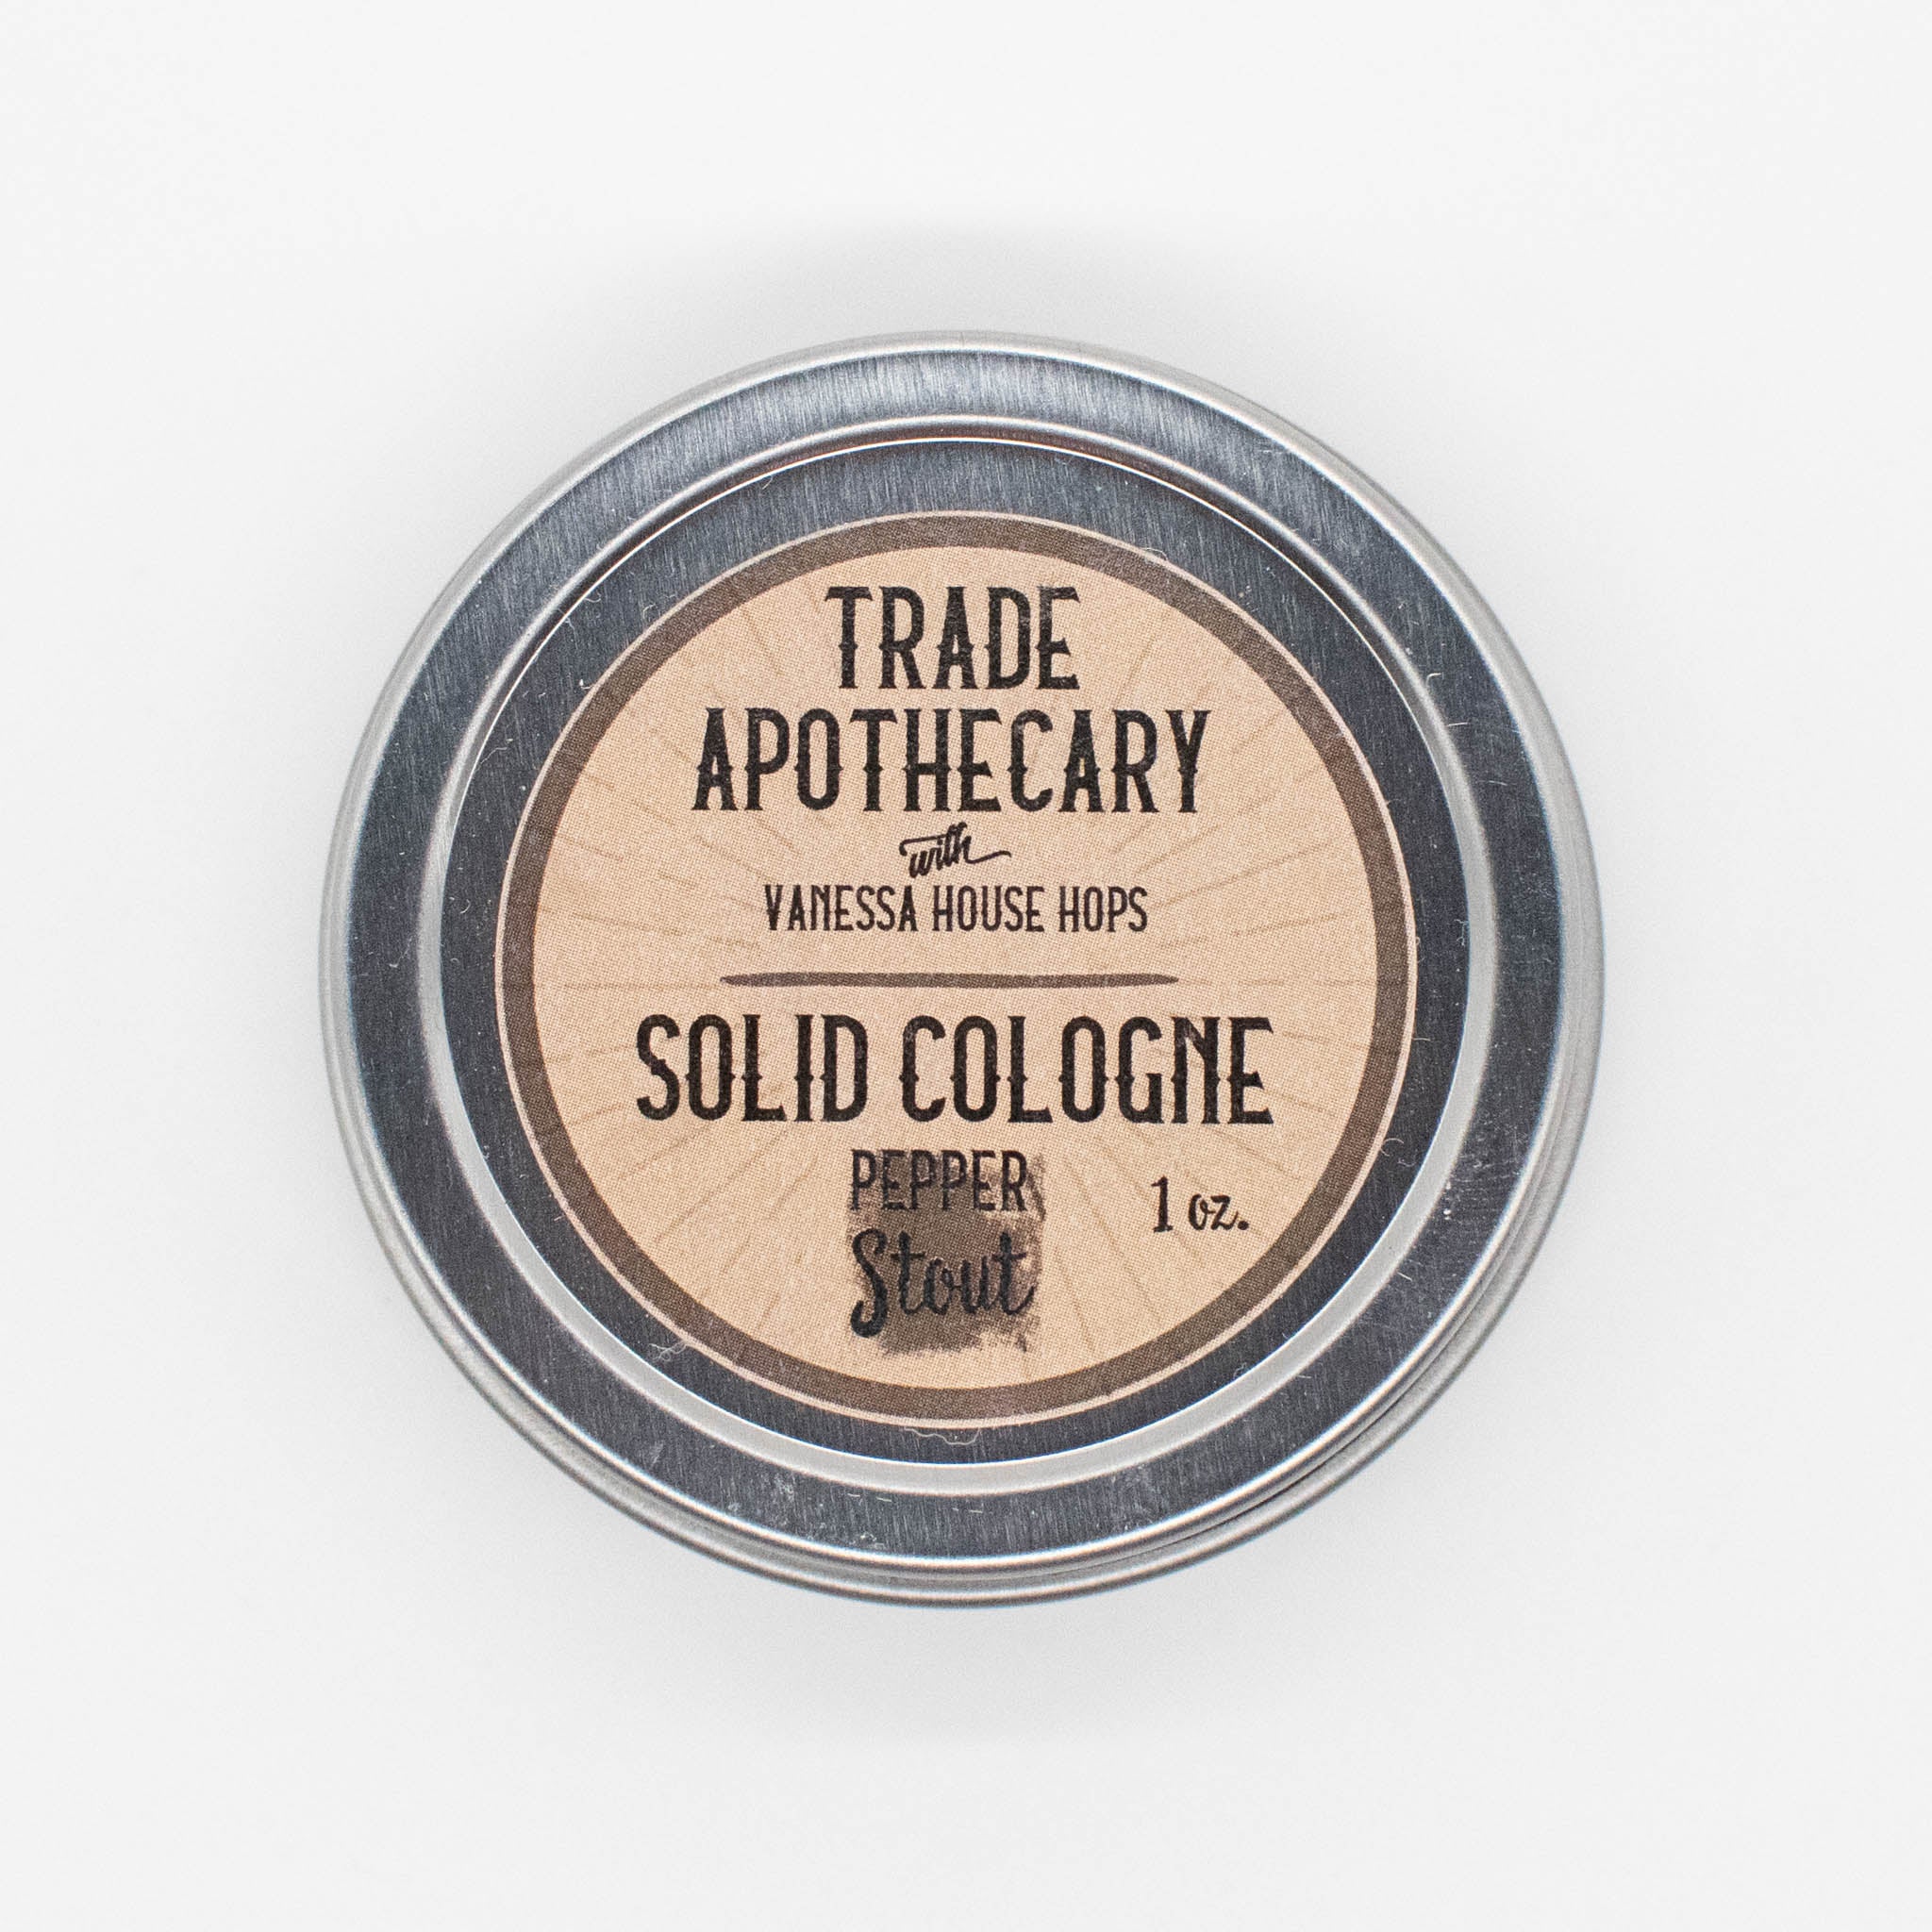 Pepper Stout Solid Cologne